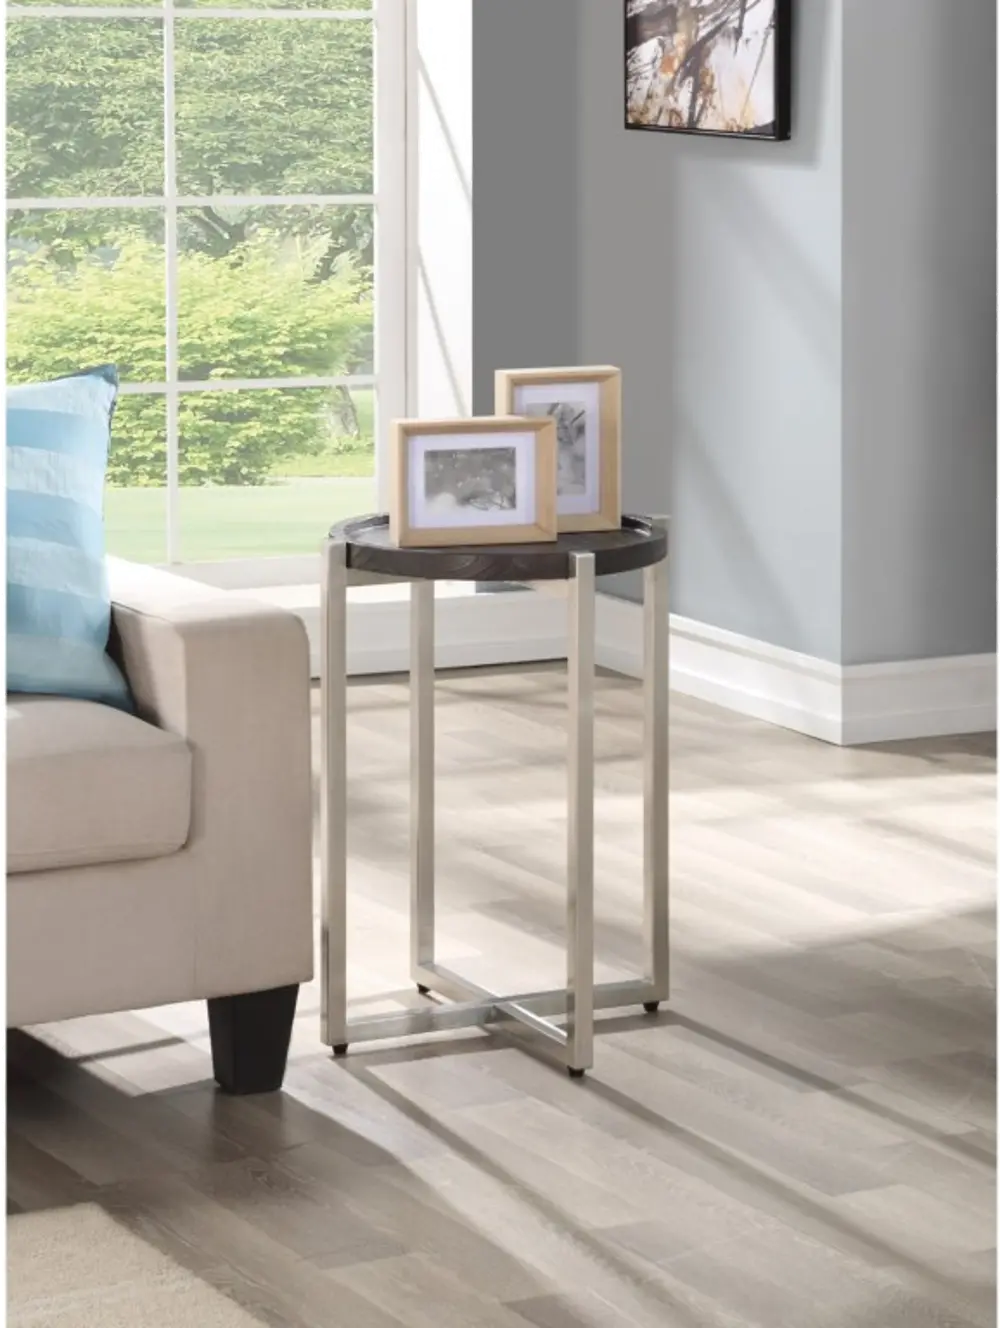 Platform Dark Brown Chairside Table with Stainless Steel Base-1